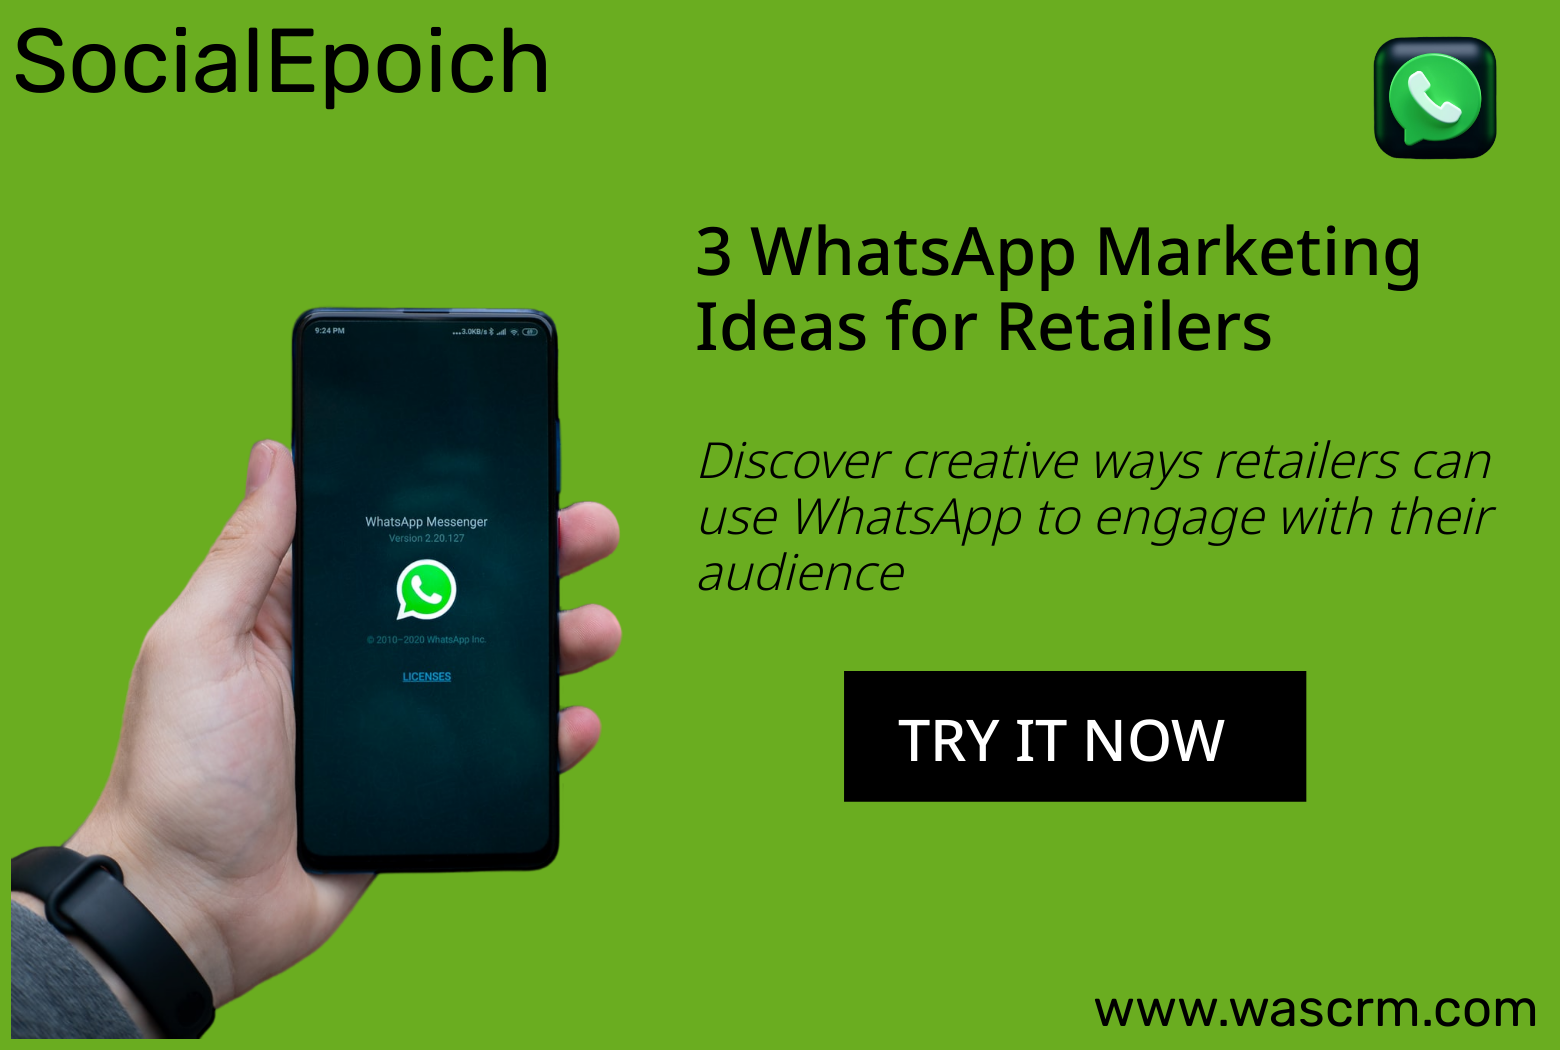 3 WhatsApp Marketing Ideas for Retailers: Discover creative ways retailers can use WhatsApp to engage with their audience